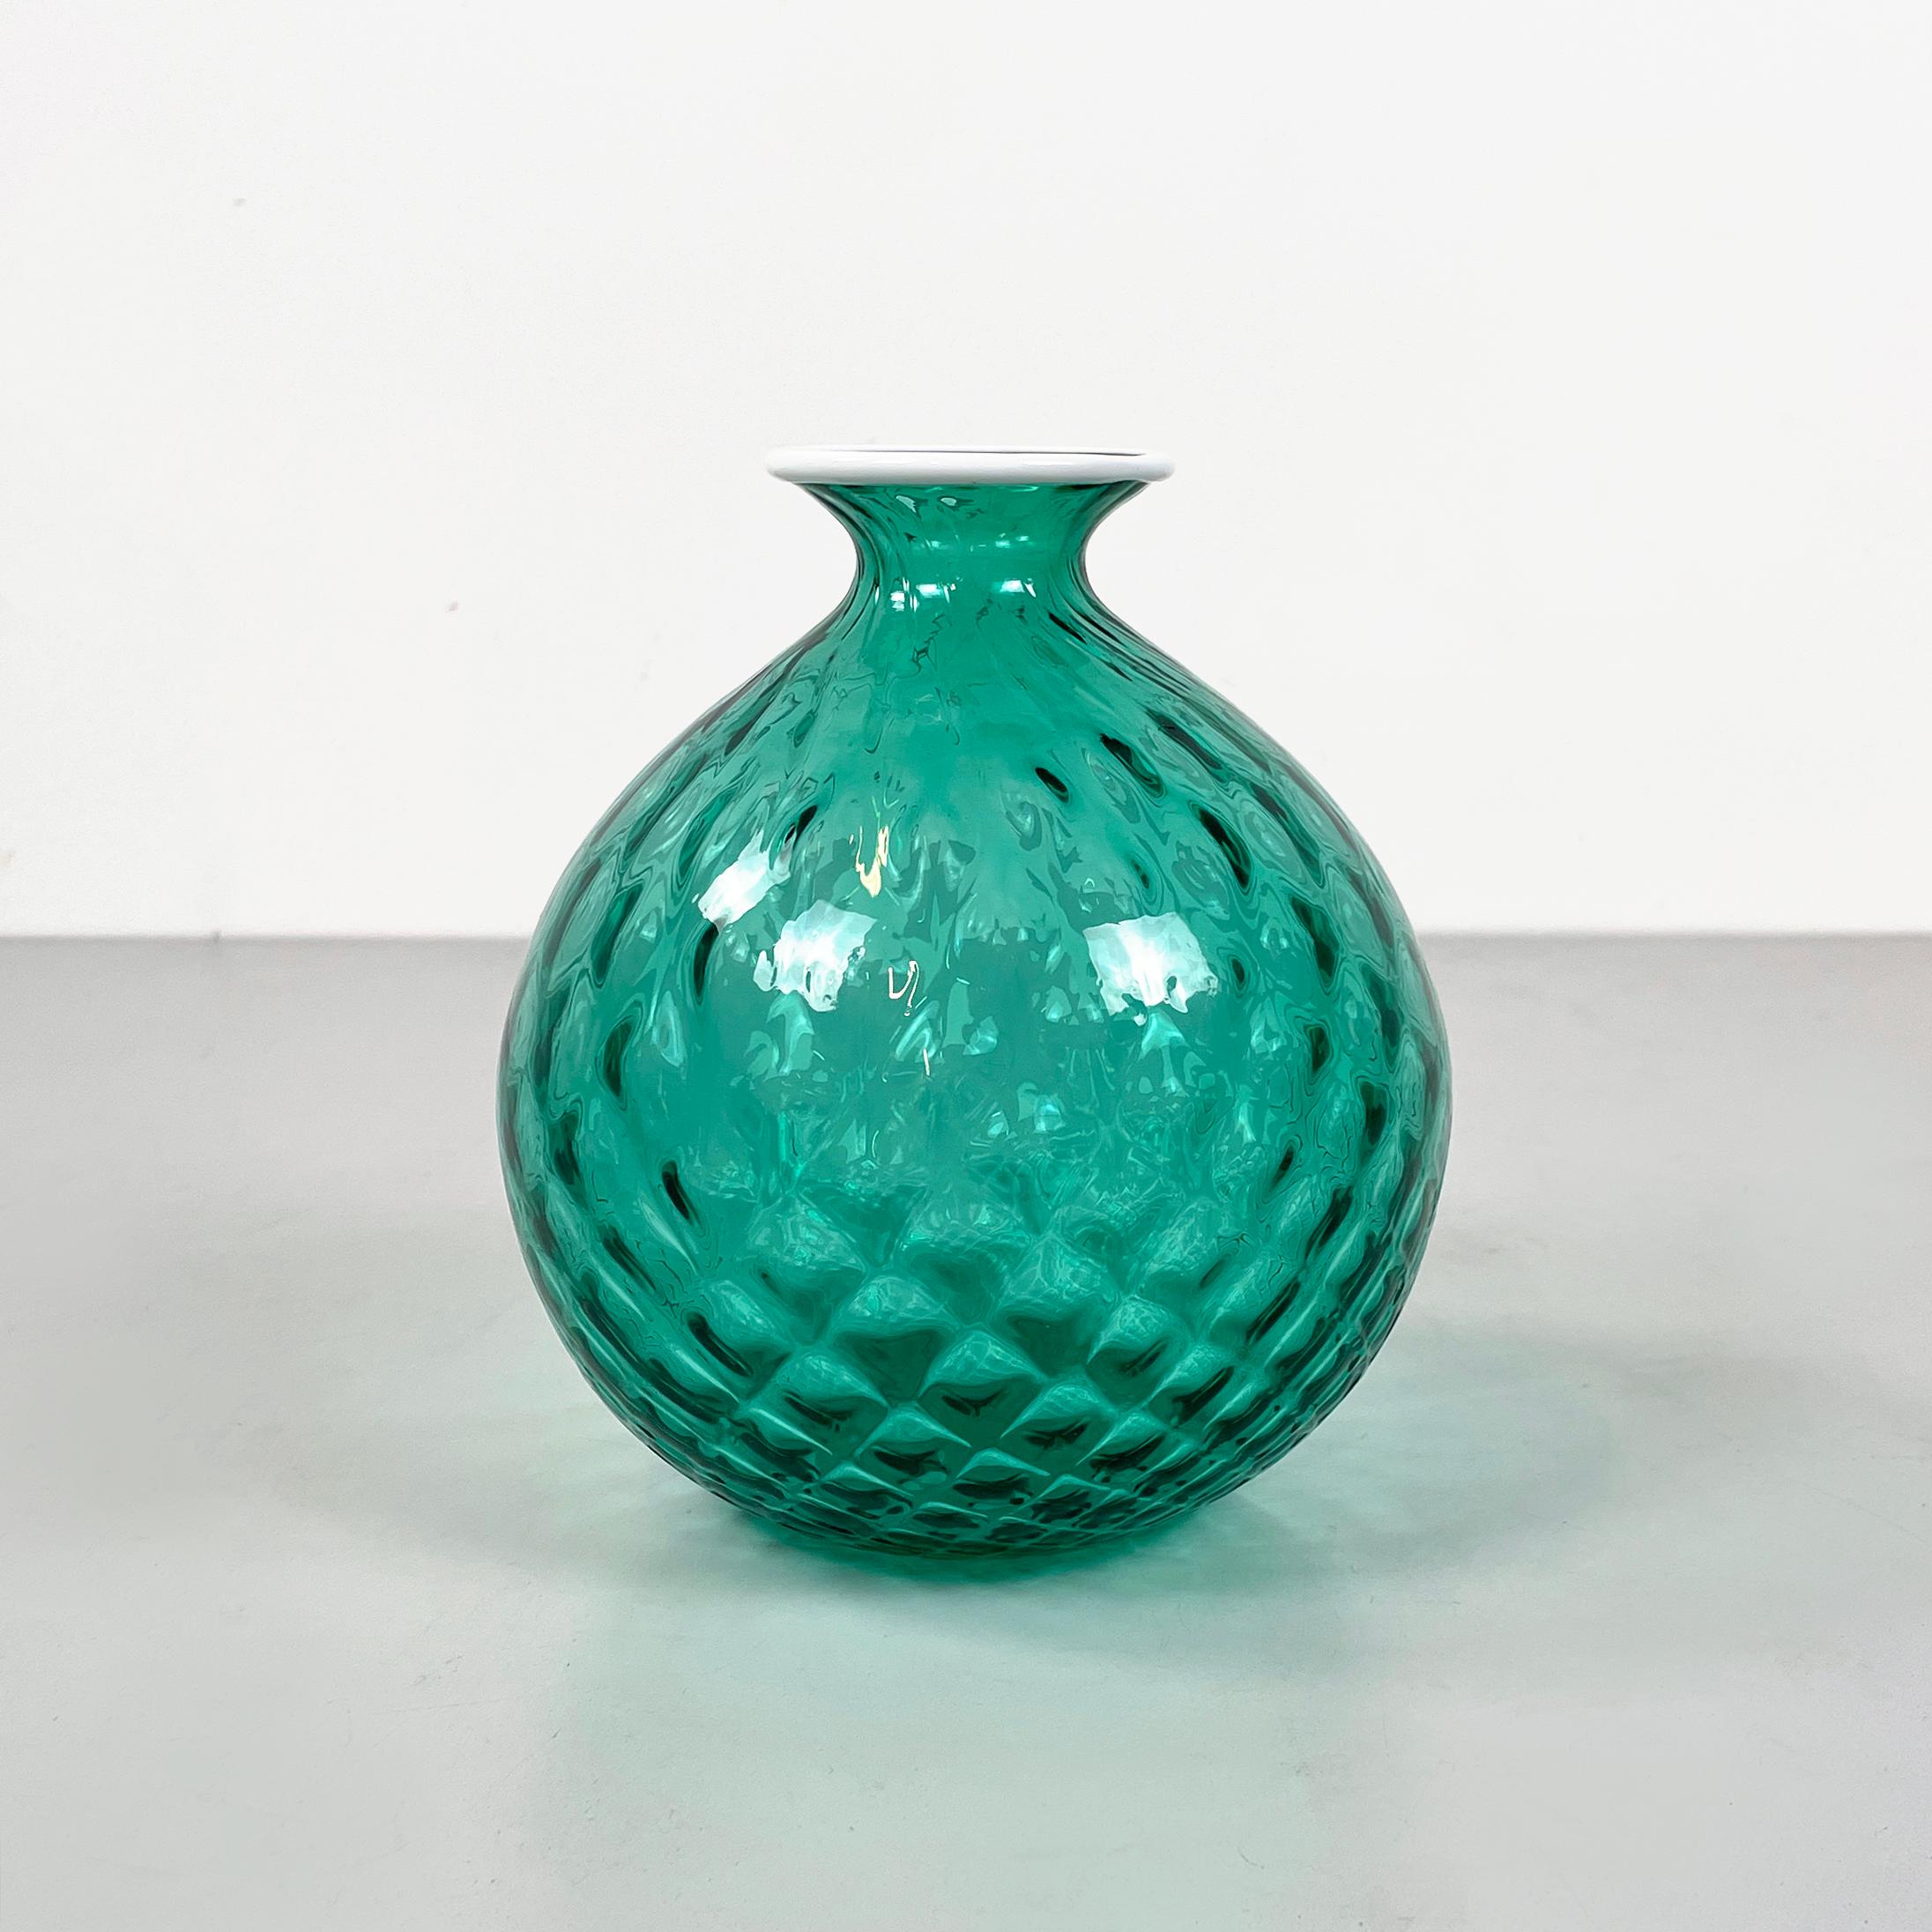 Italian modern round vase in green and white Murano glass by Venini 1990s
Vintage and fantastic vase with round base, in textured green Murano glass. In the upper part it has a round hole with a white painted edge. The structure widens in the center